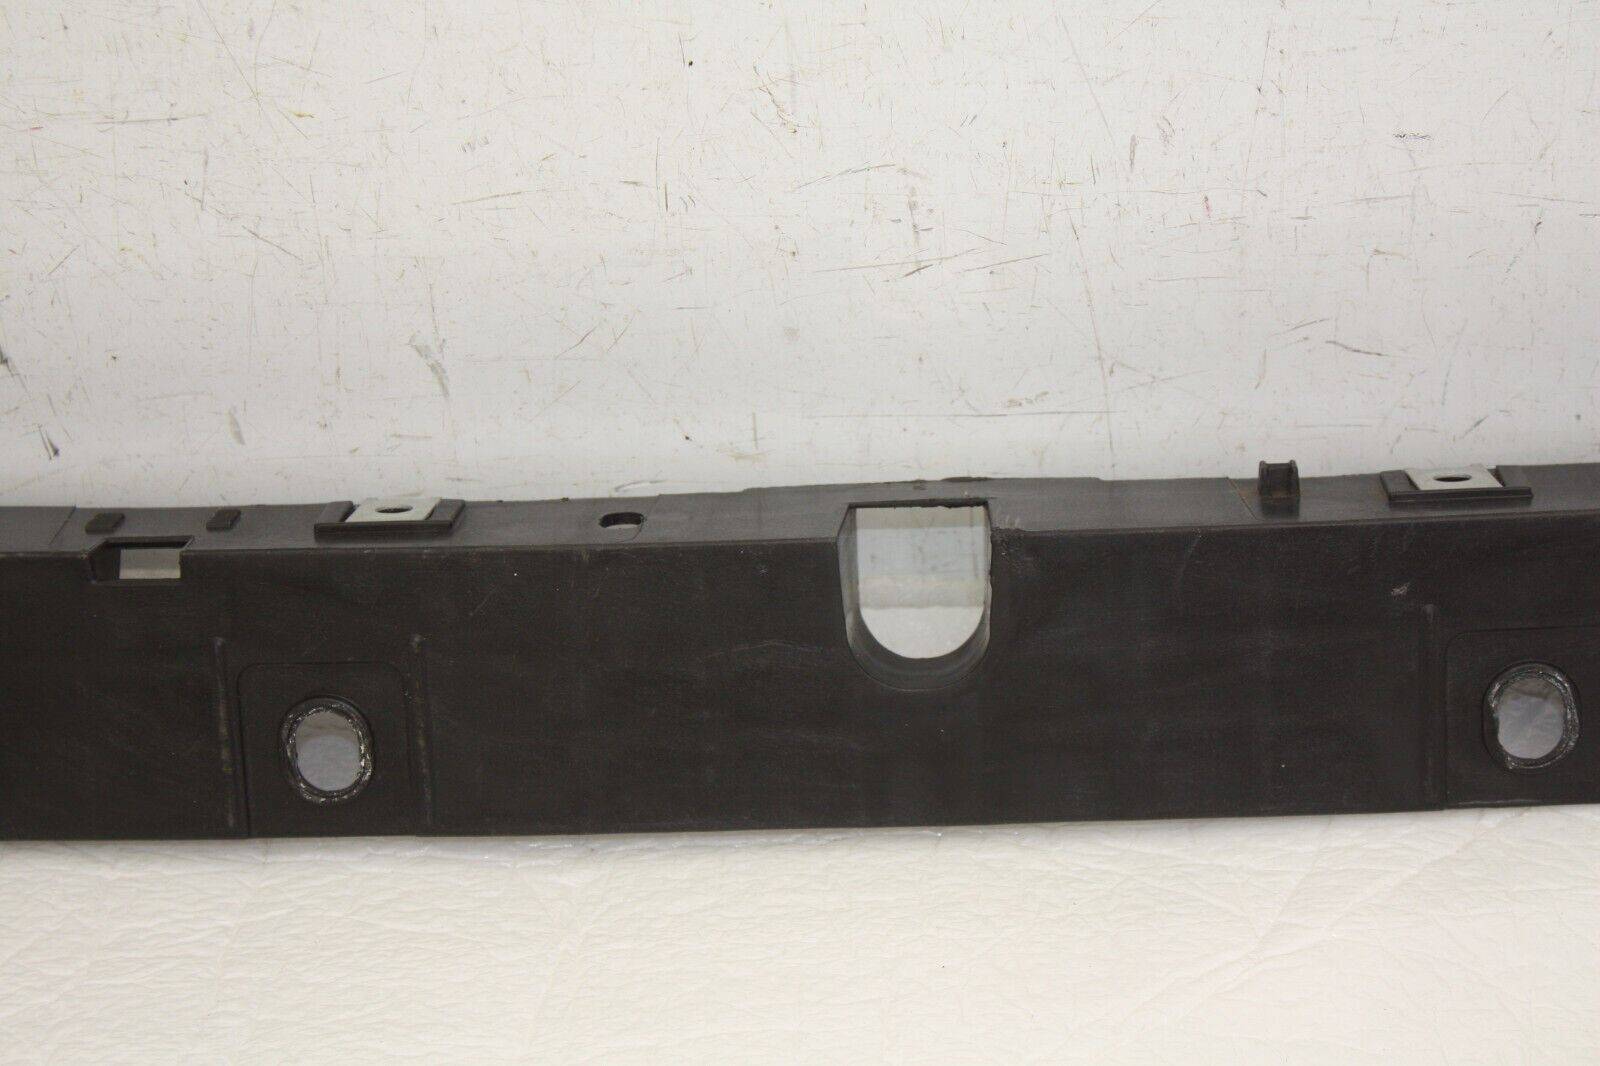 BMW-2-3-Series-Front-Air-Induct-Grill-Shutter-Bracket-517415677210-Genuine-176375091912-4